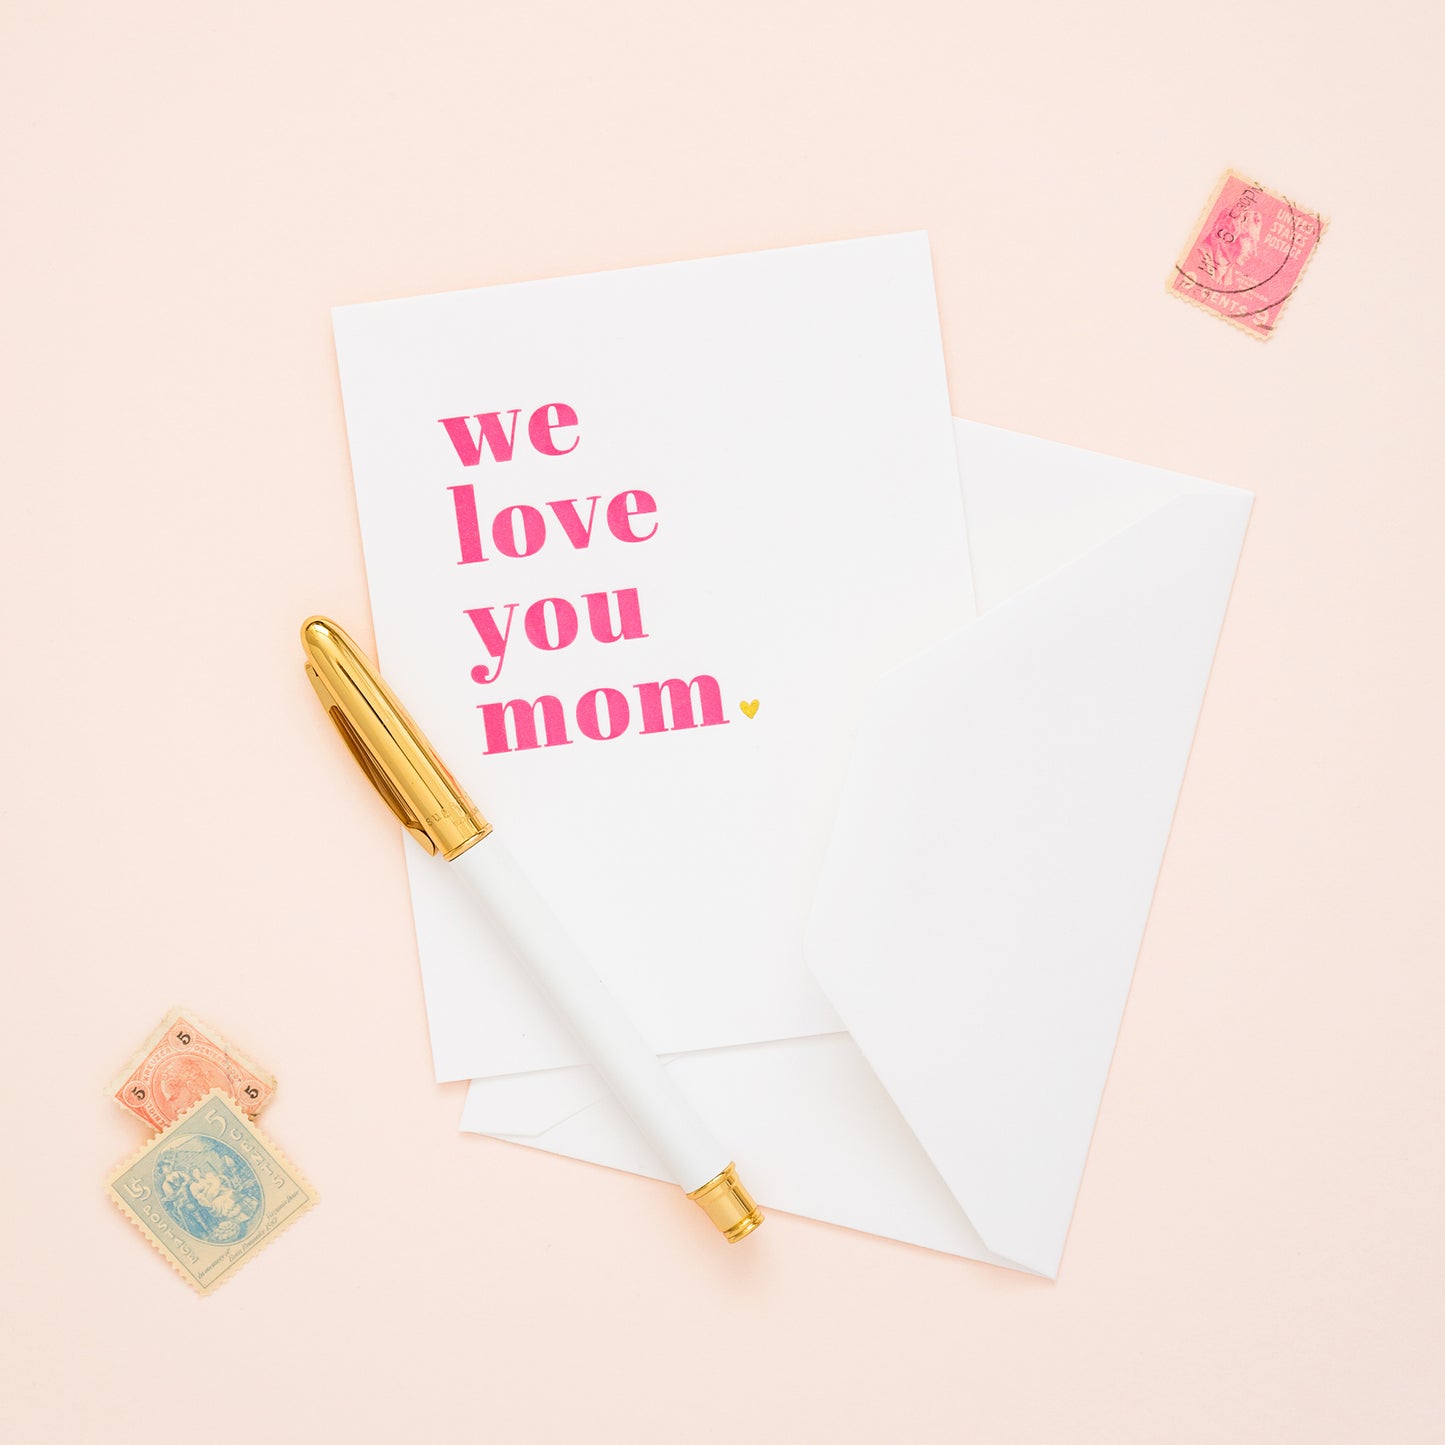 we love you mom card on desk with pen and stamps